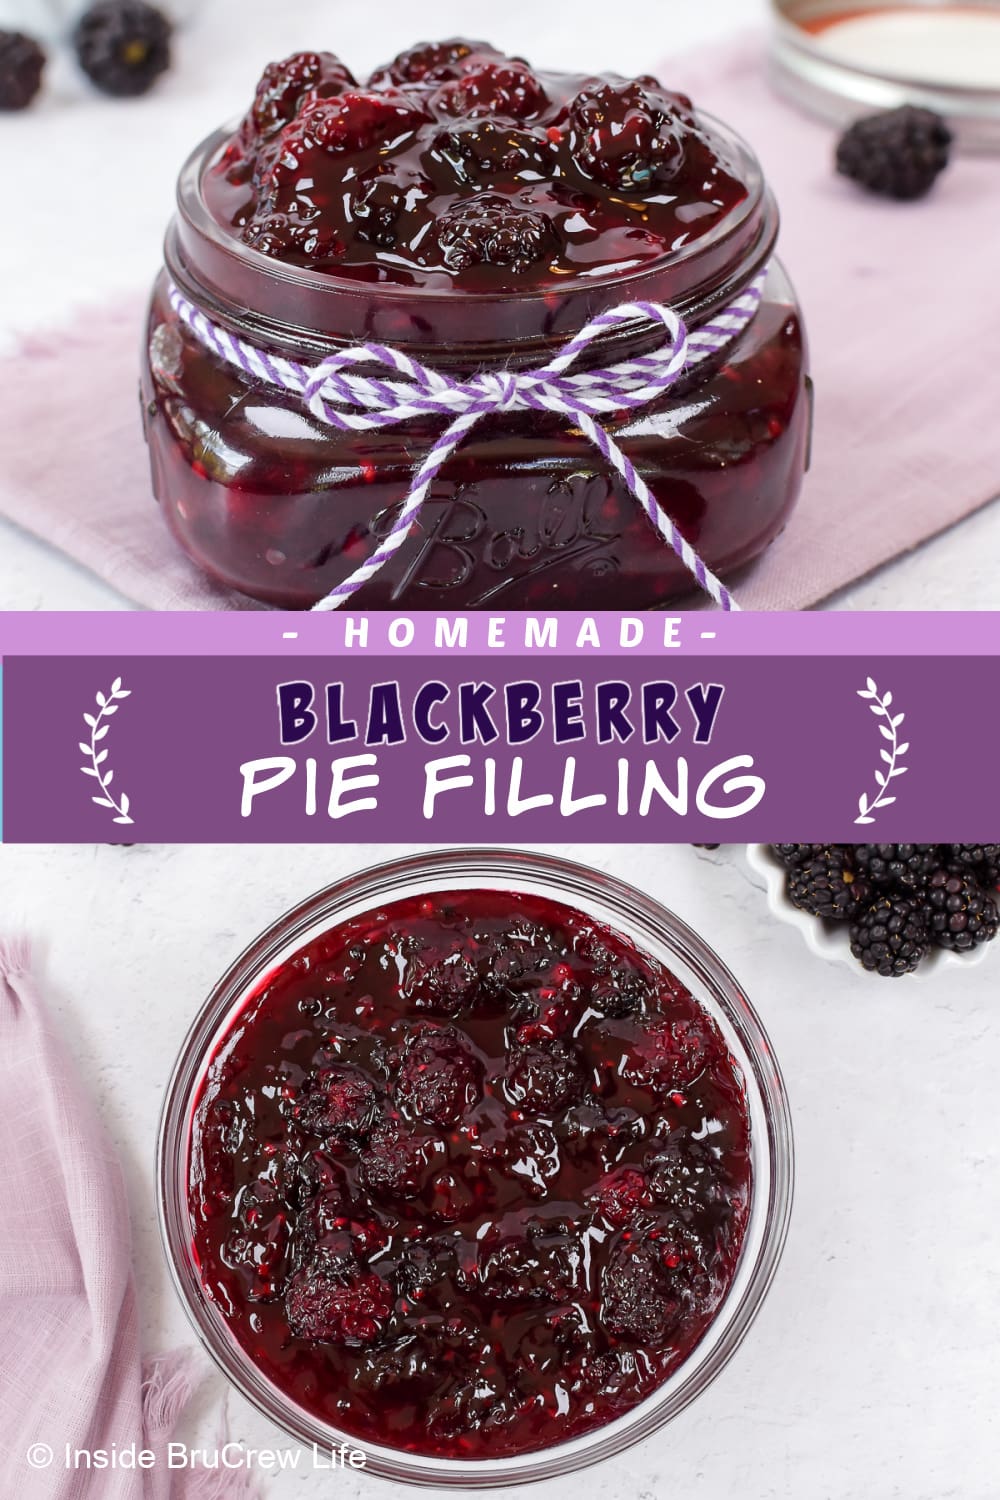 Two pictures of pie filling collaged together with a purple text box.